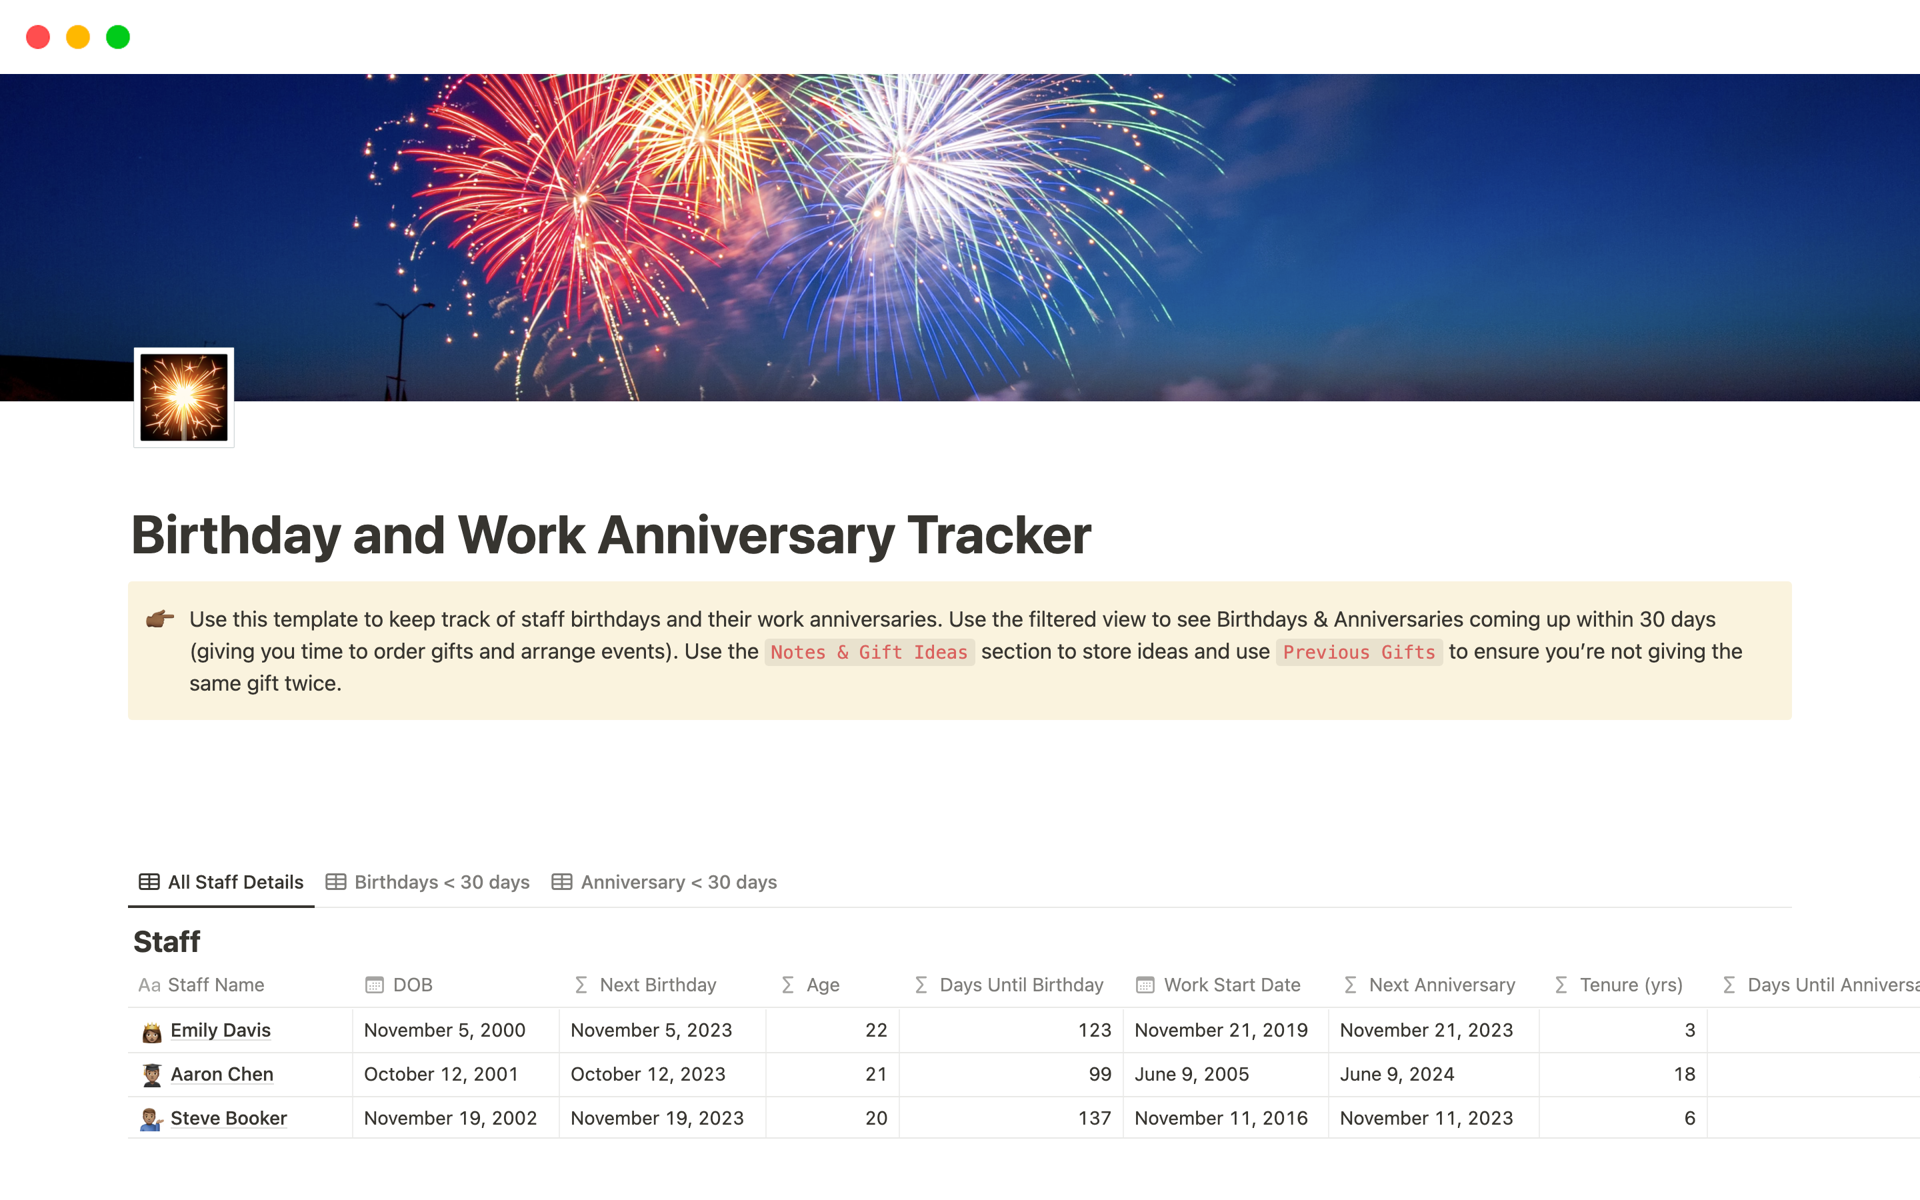 Use this template to keep track of staff birthdays and their work anniversaries.